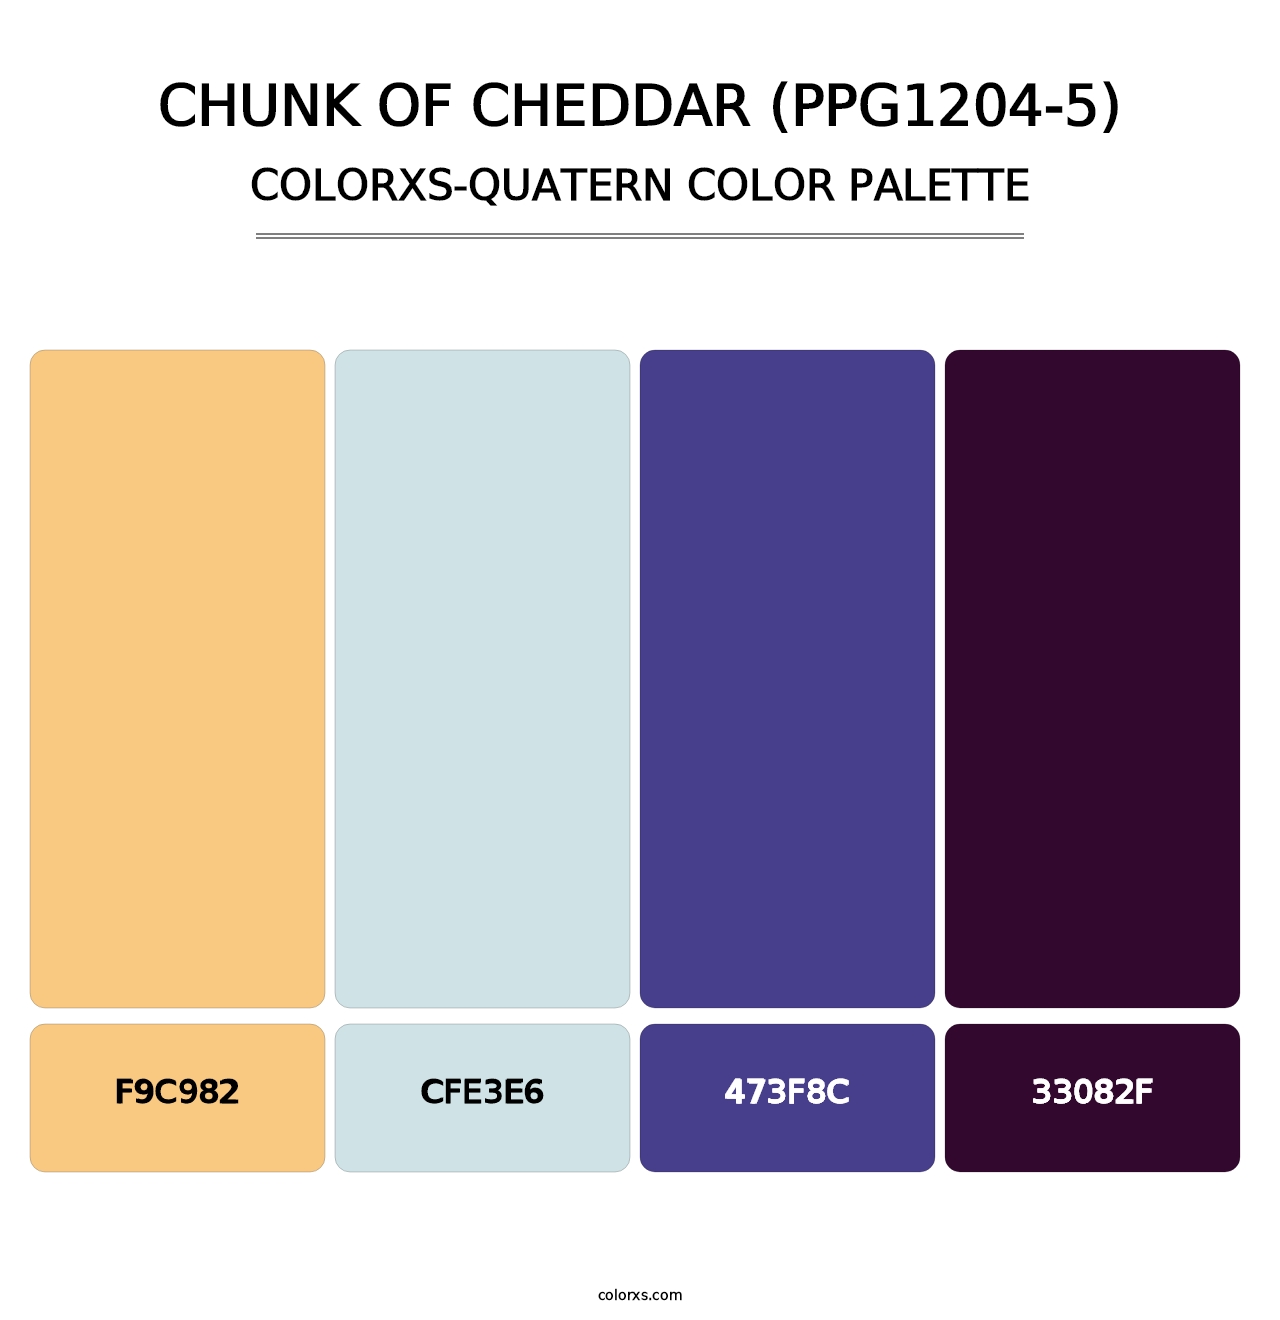 Chunk Of Cheddar (PPG1204-5) - Colorxs Quatern Palette